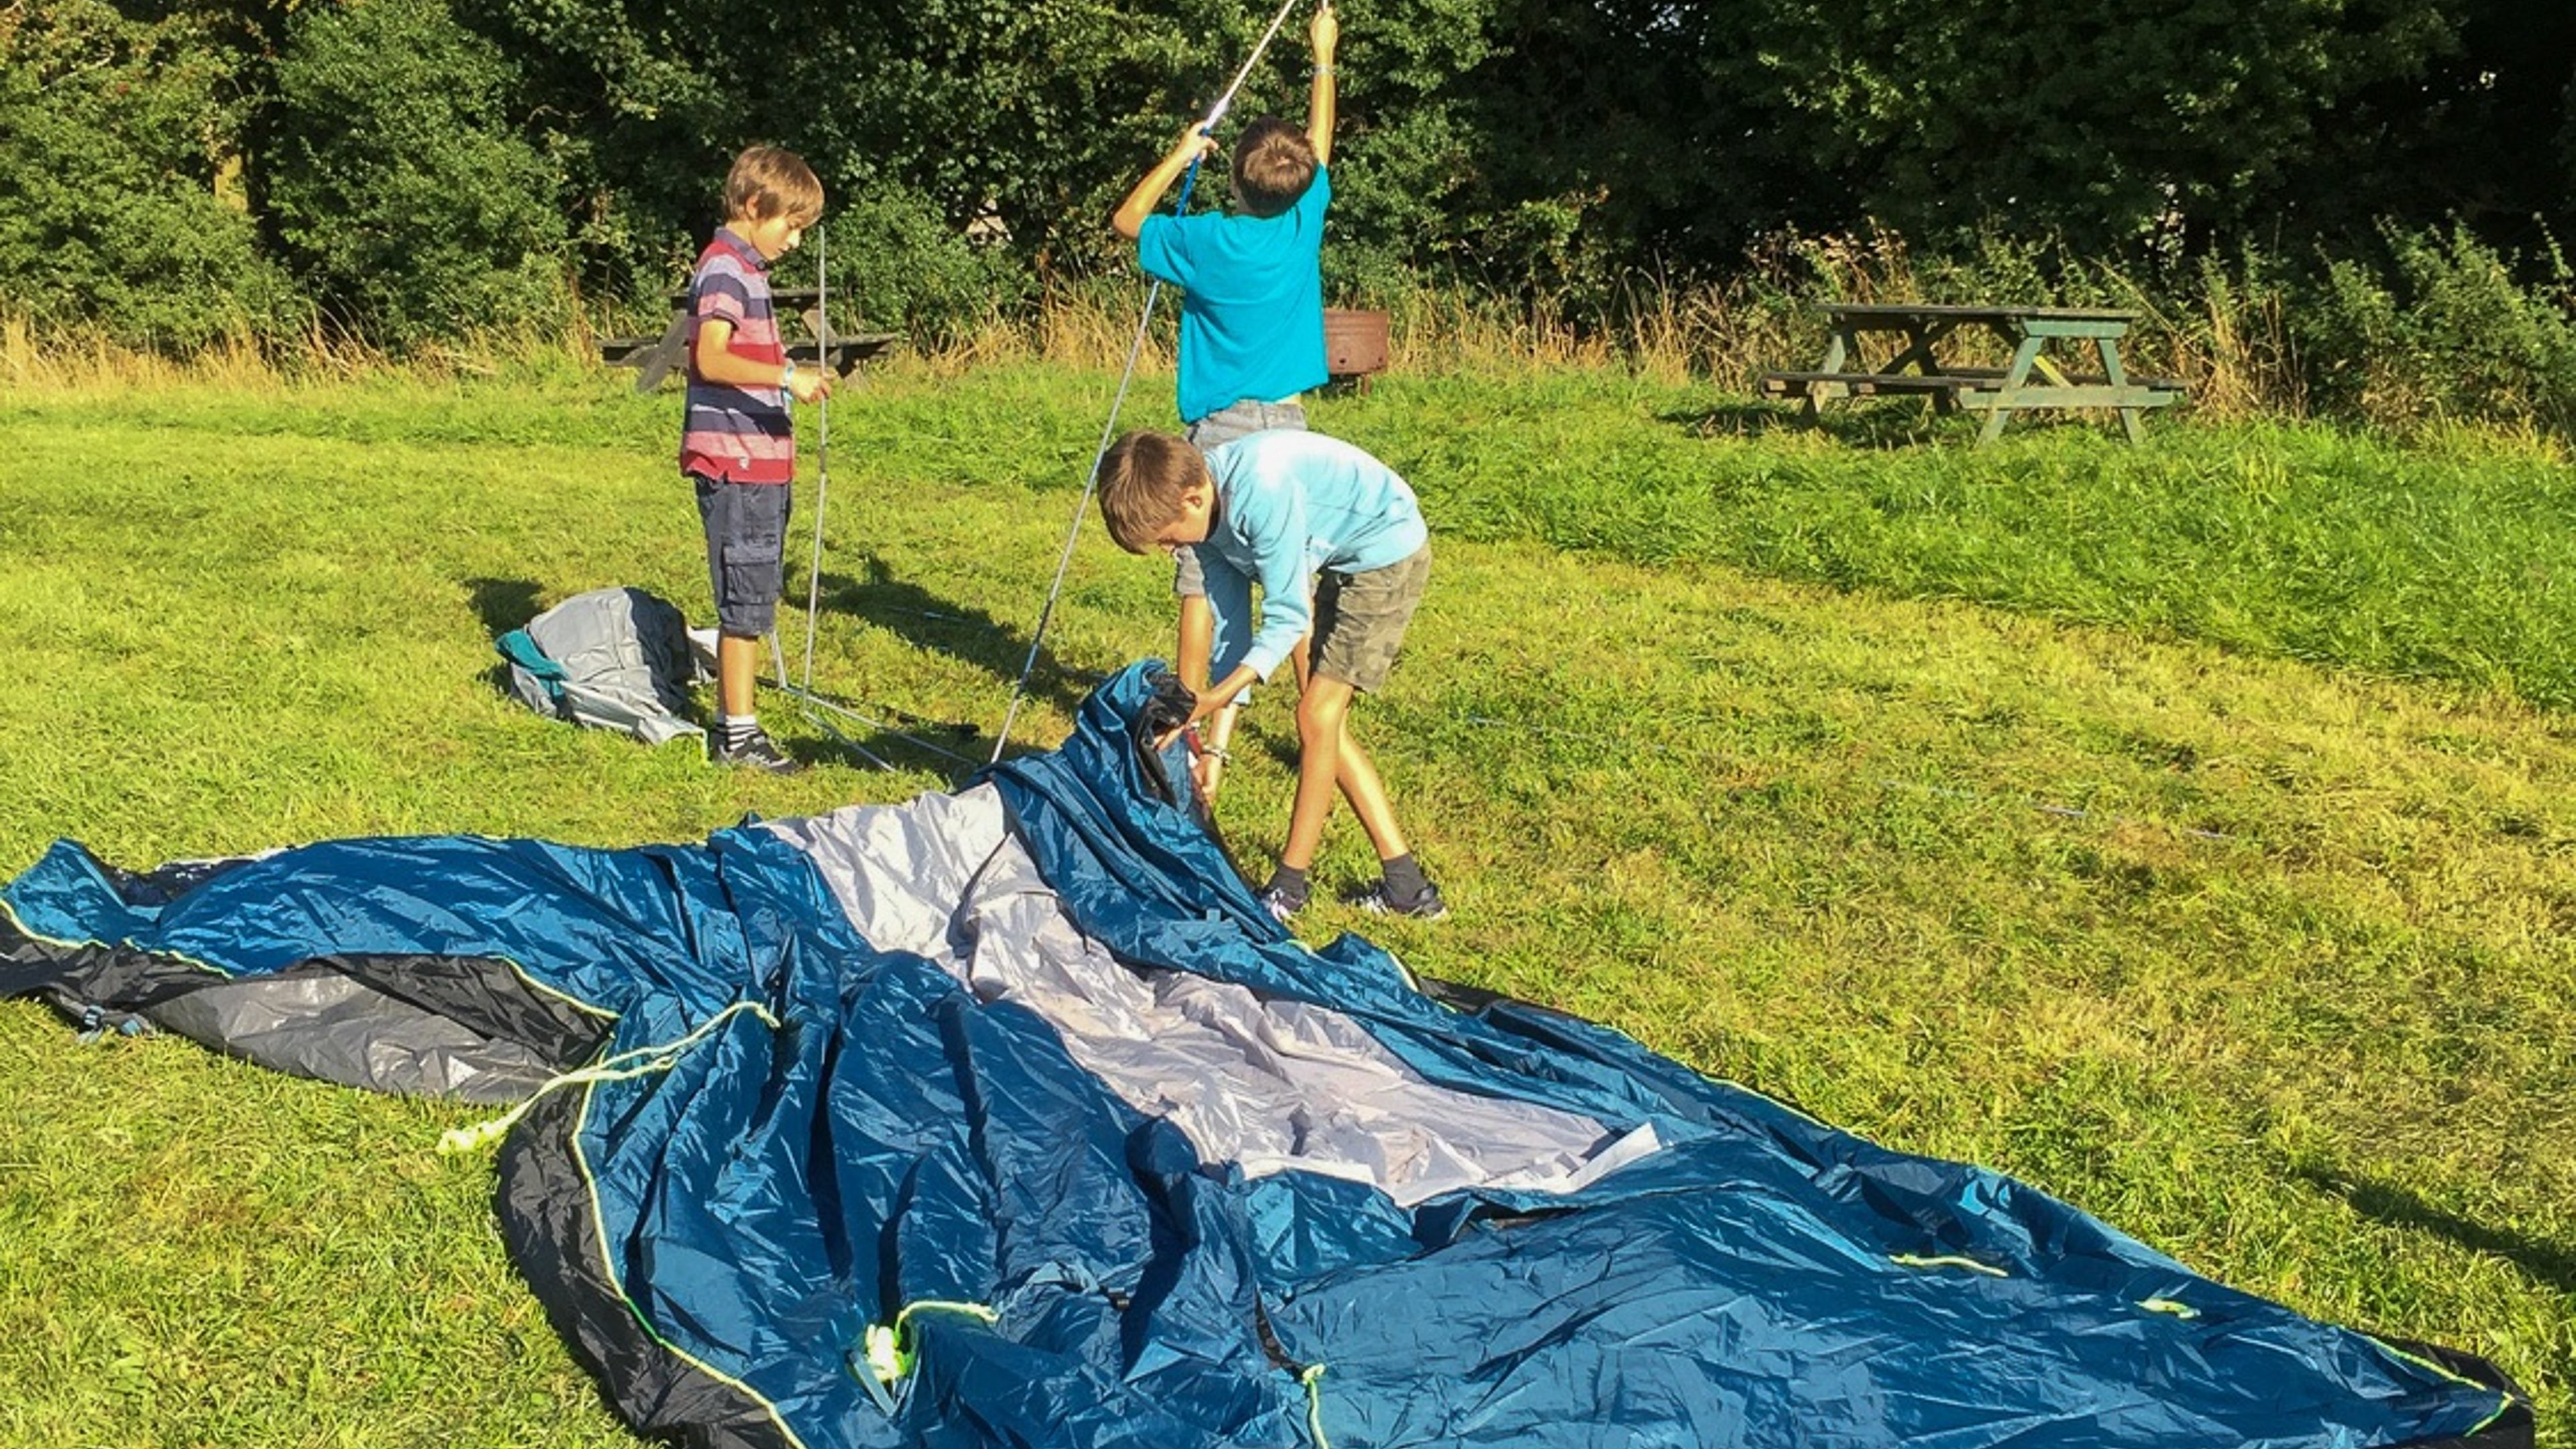 The kids setting up their tent